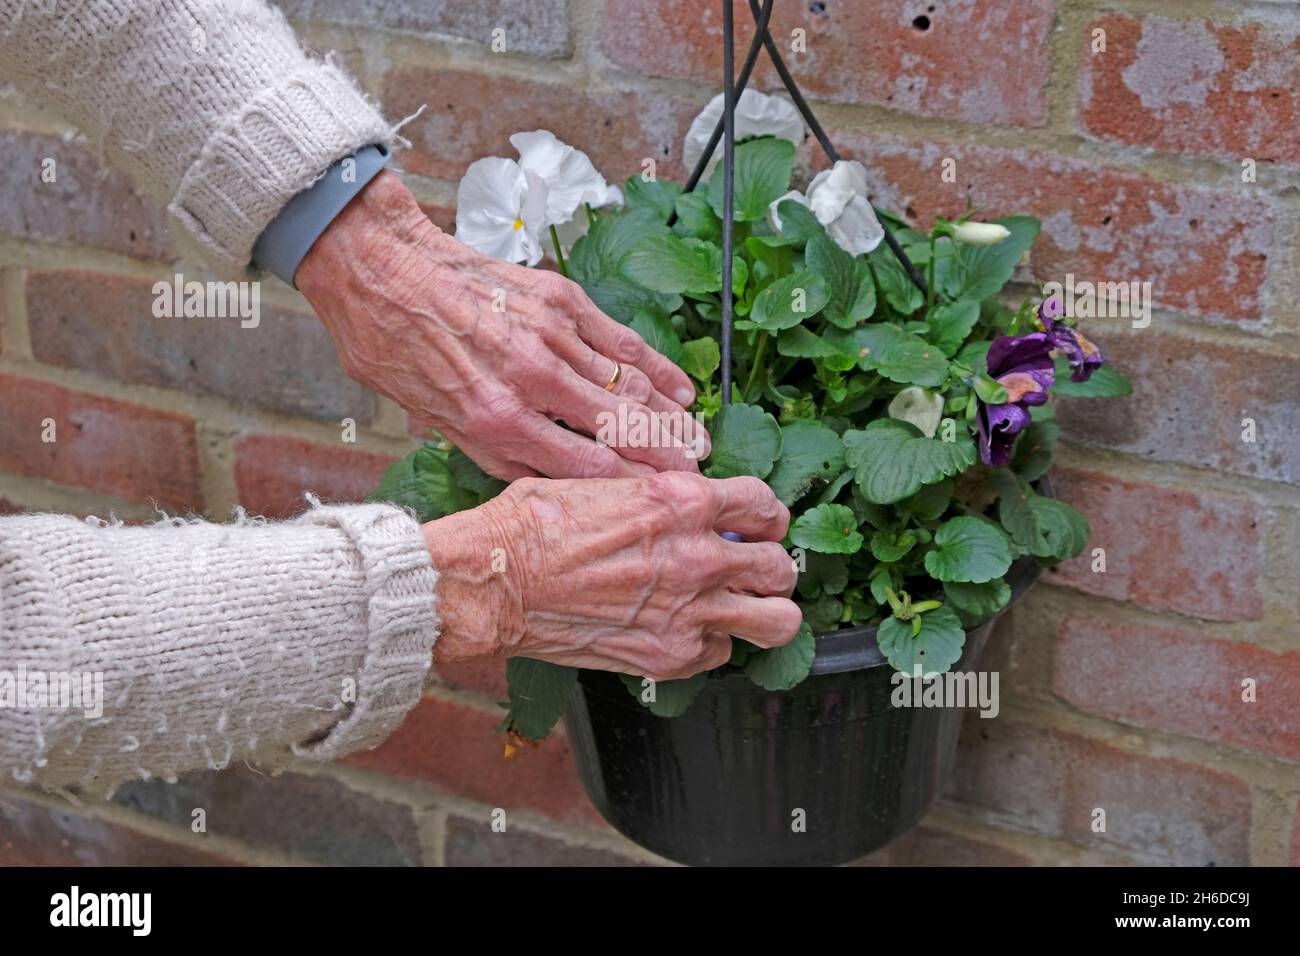 Hands of a senior lady gardening with a hanging basket Stock Photo